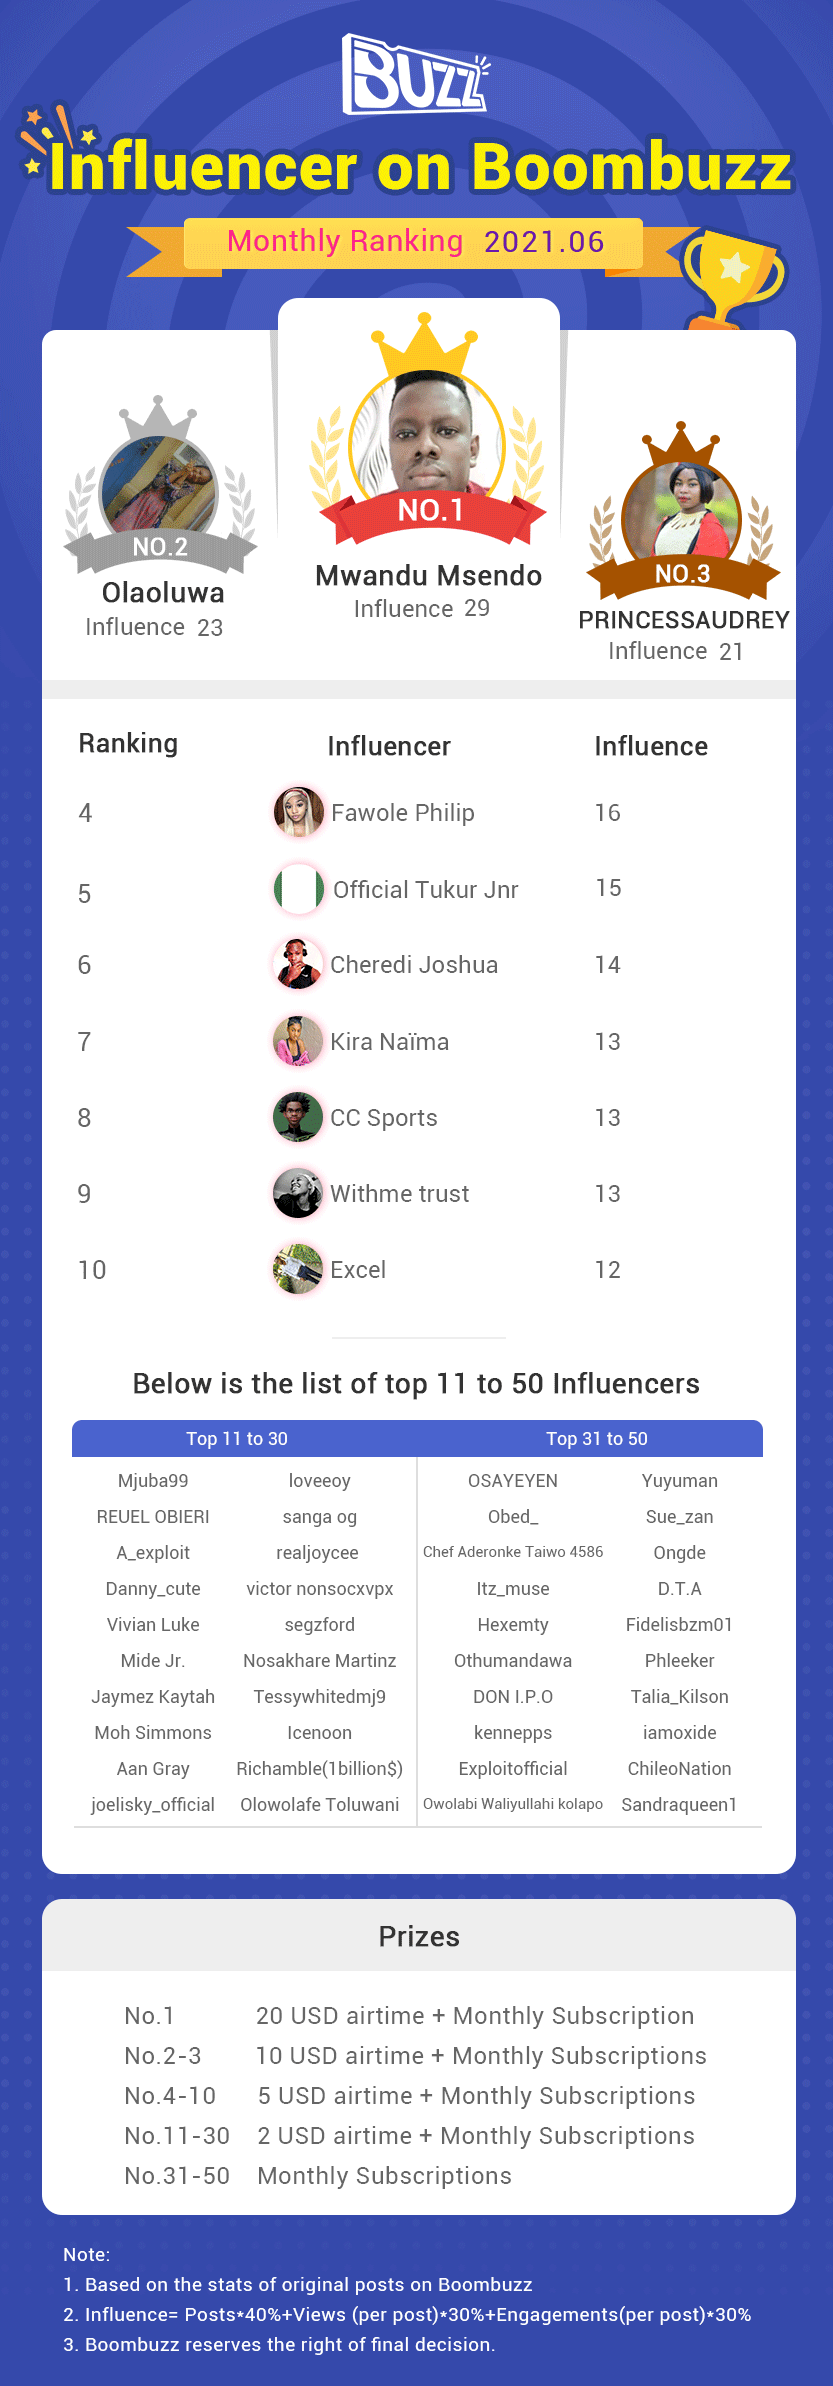 Influencer on Boombuzz | Influencer Monthly Ranking_June (results)